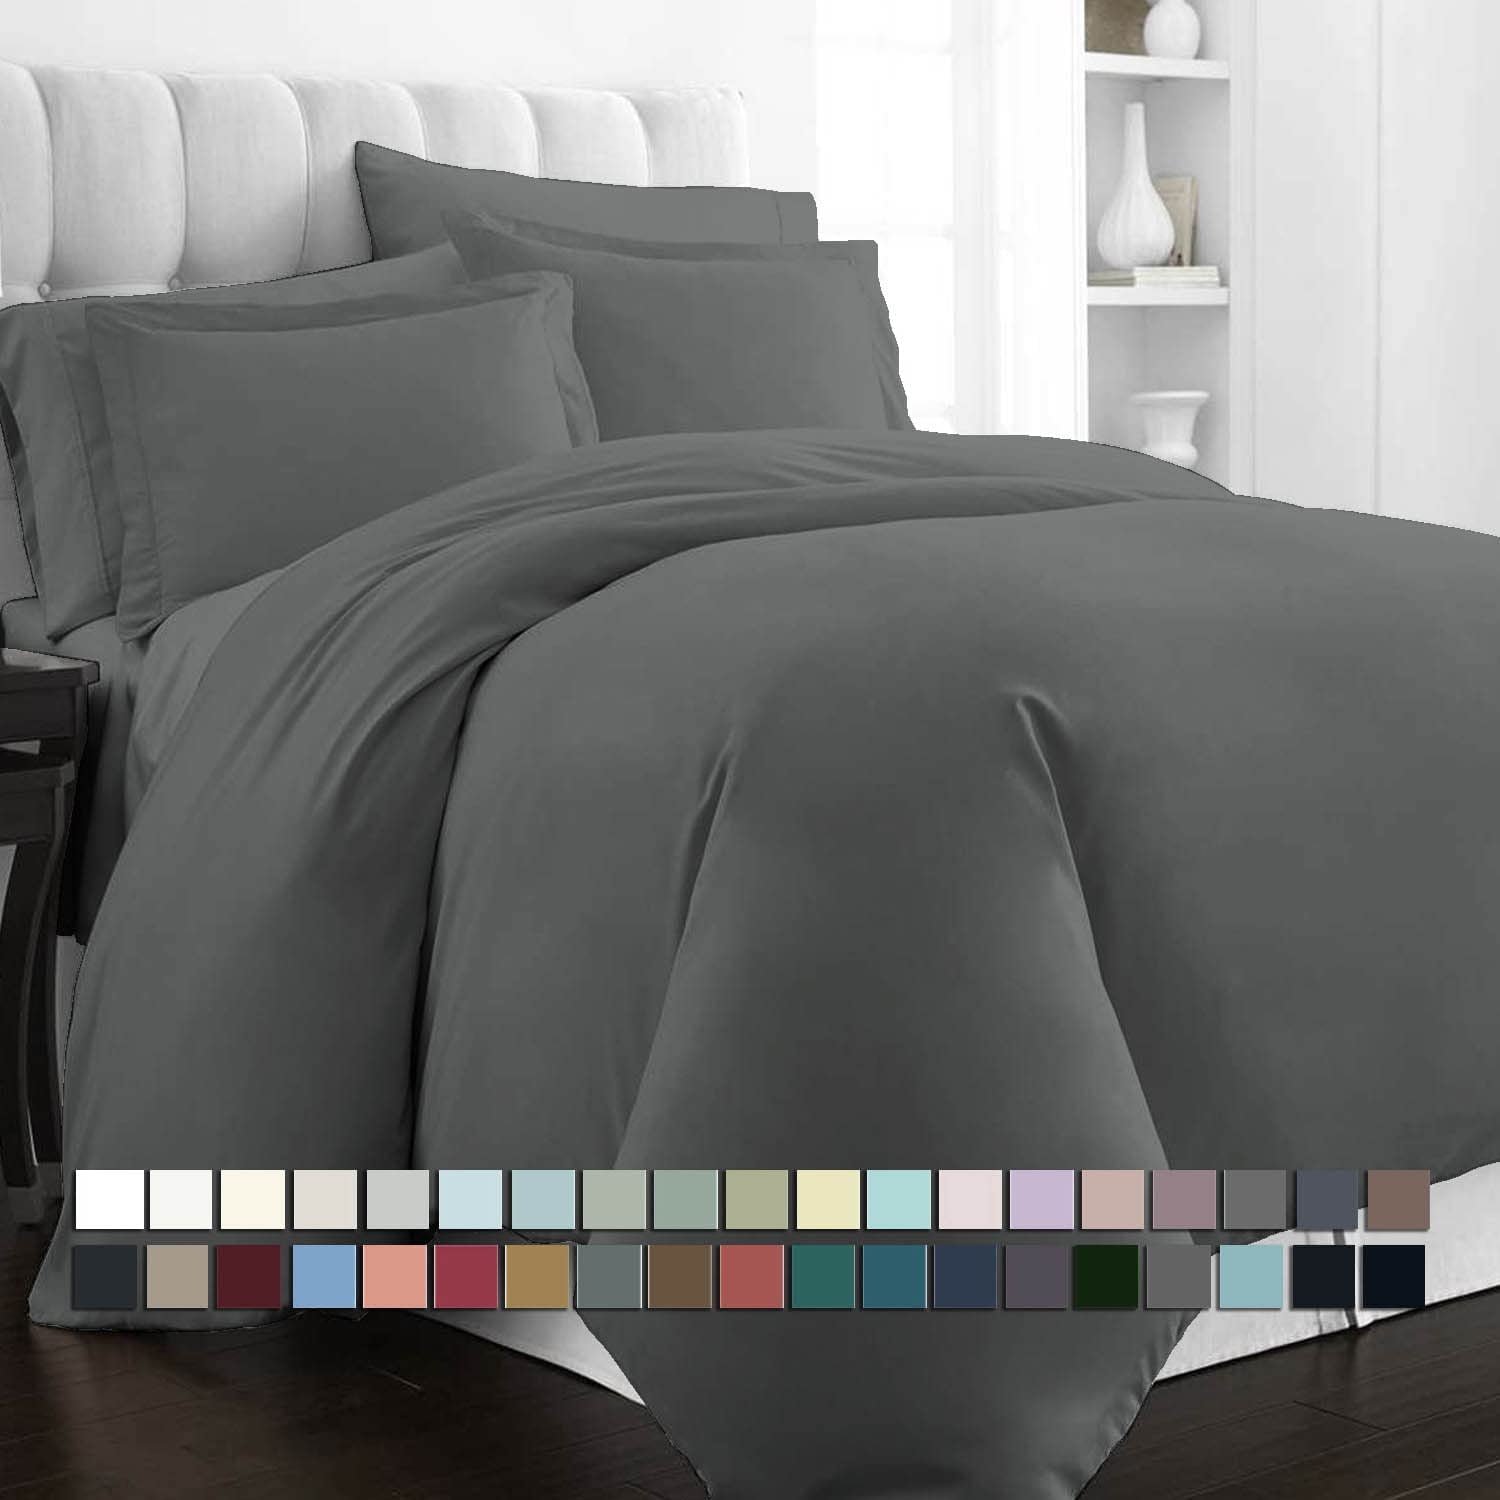 400 Thread Count 100% Cotton Soft Luxury Comforter Cover and Two Pillow Shams Dark Gray Duvet Cover King with Button Closure and Corner Ties 3 Piece Sateen Weave Bedding Set